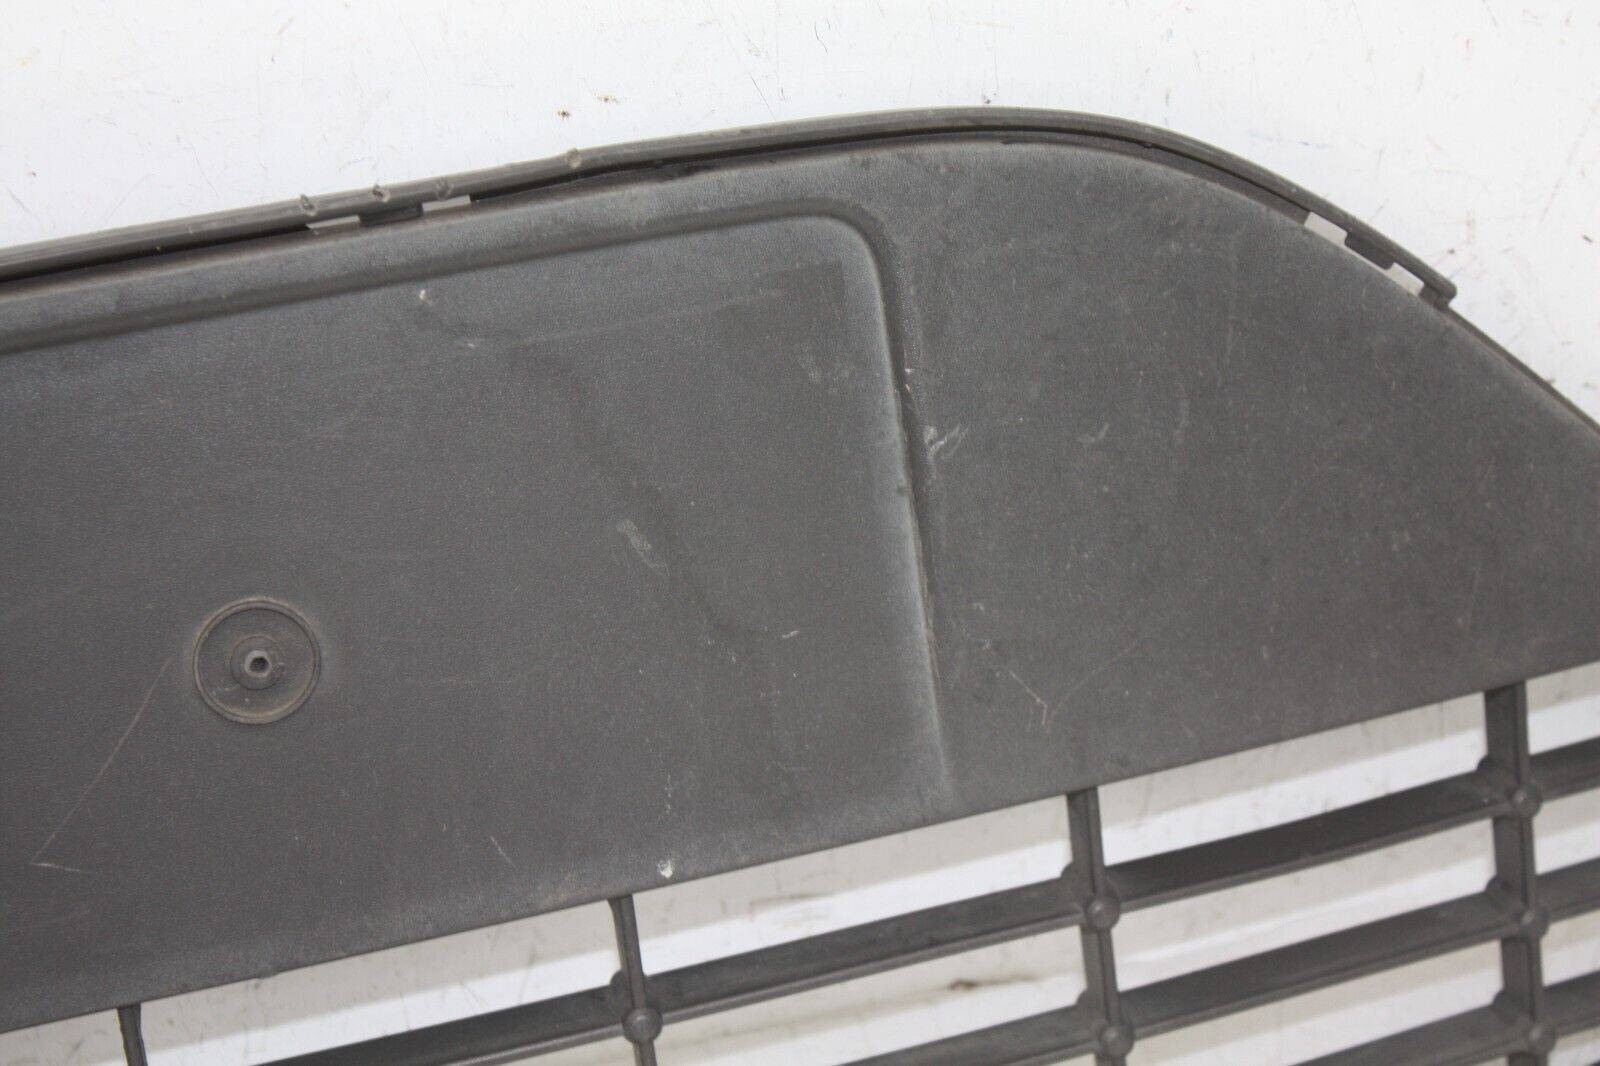 Ford-Focus-Front-Bumper-Grill-2008-TO-2011-8M51-17B968-BE-Genuine-DAMAGED-176410989719-6